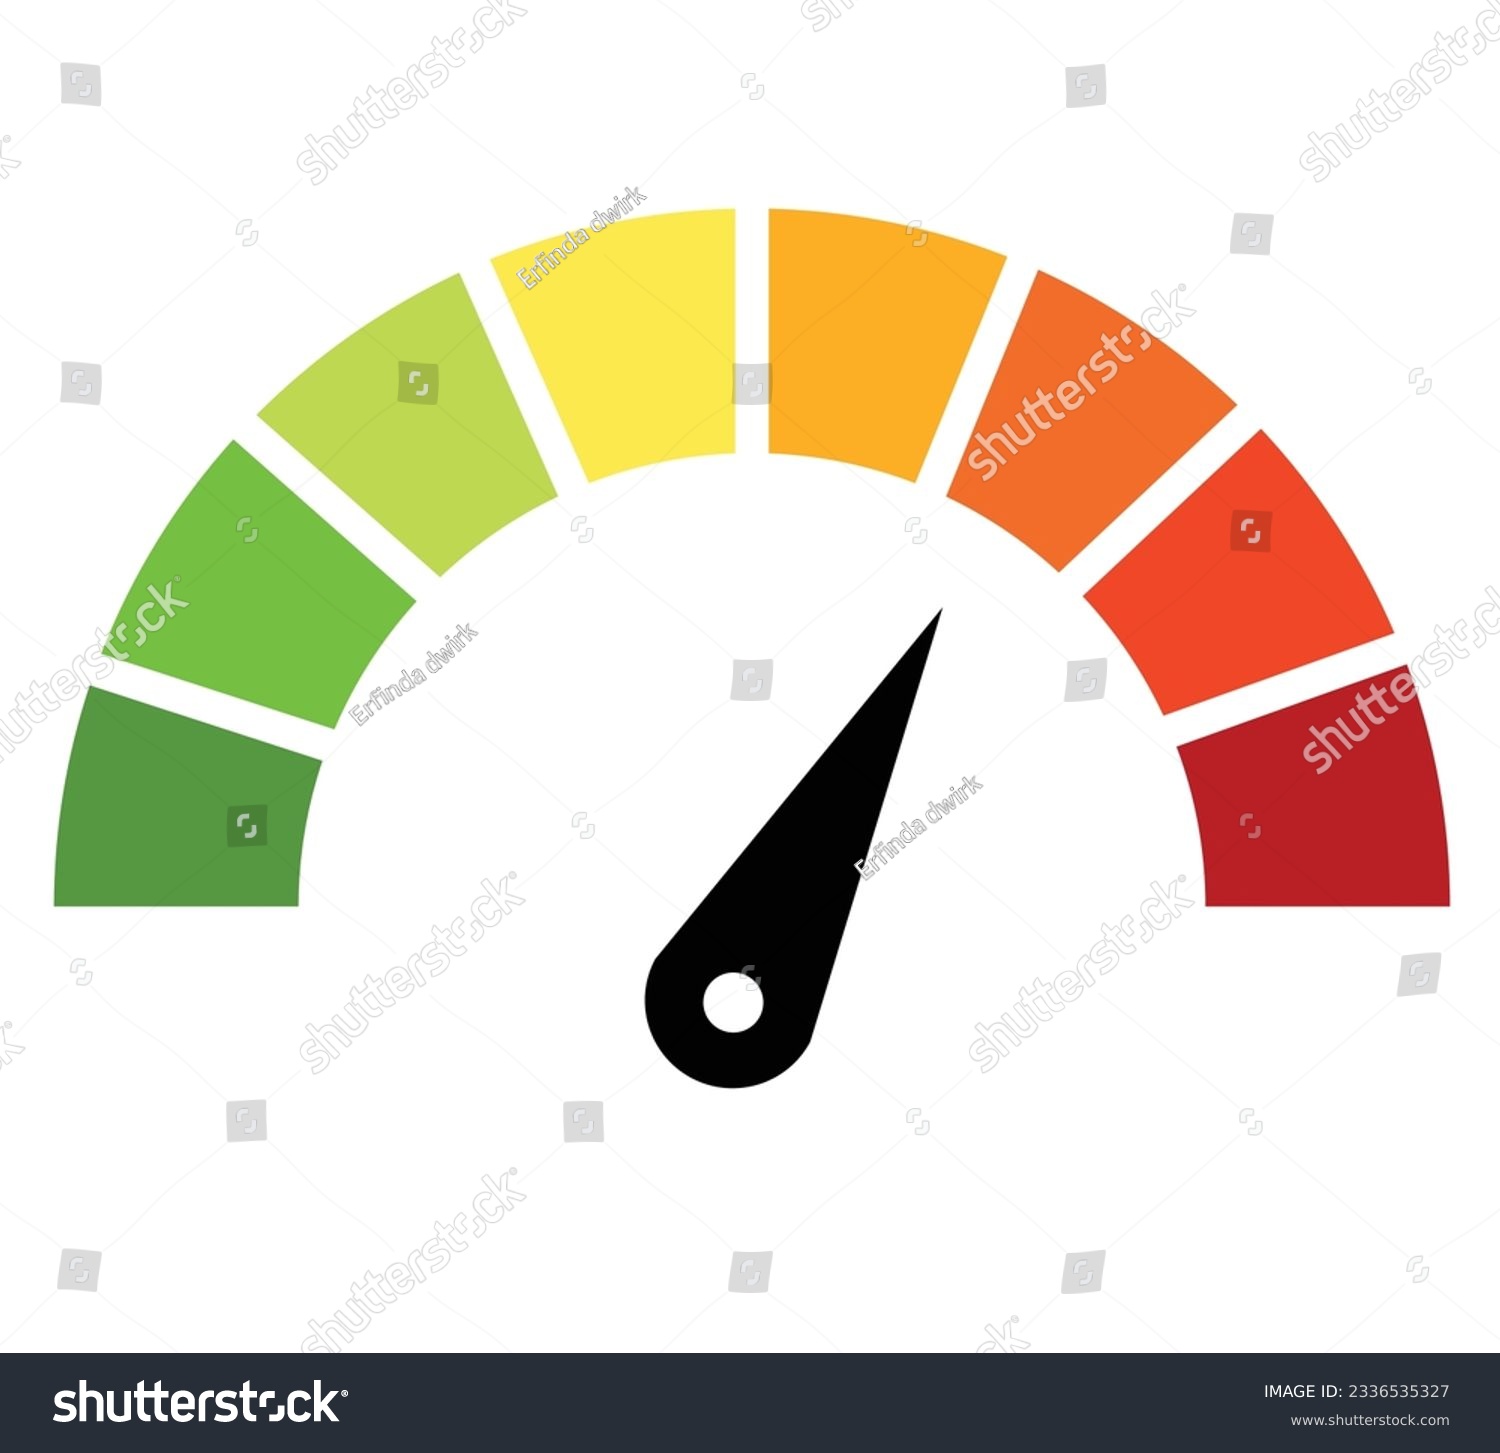 SVG of Speedometer, gauge meter icons. Vector scale, level of performance. Speed dial indicator . Green and red, low and high barometers, dashboard with arrows. Infographic of risk, gauge, score progress. svg